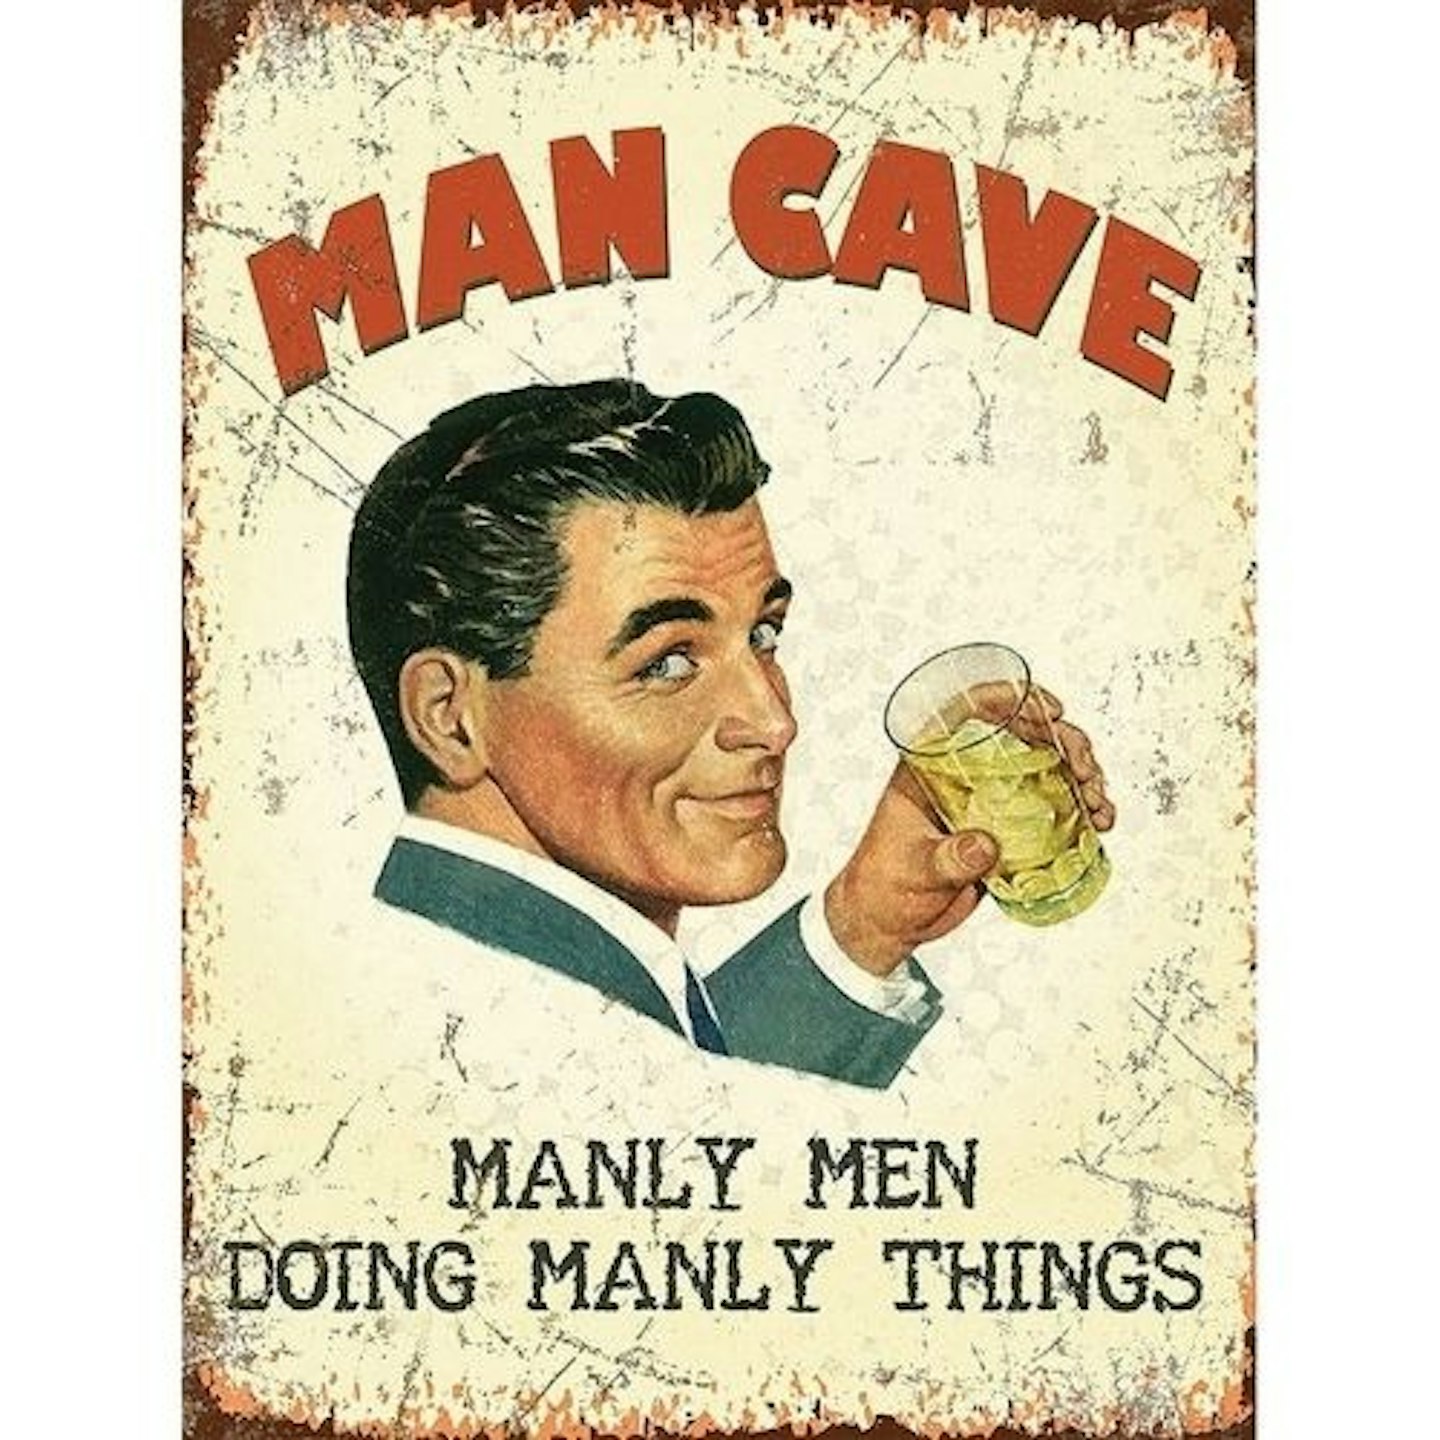 Man Cave Manly Men Doing Manly Things small steel sign 200mm x 150mm